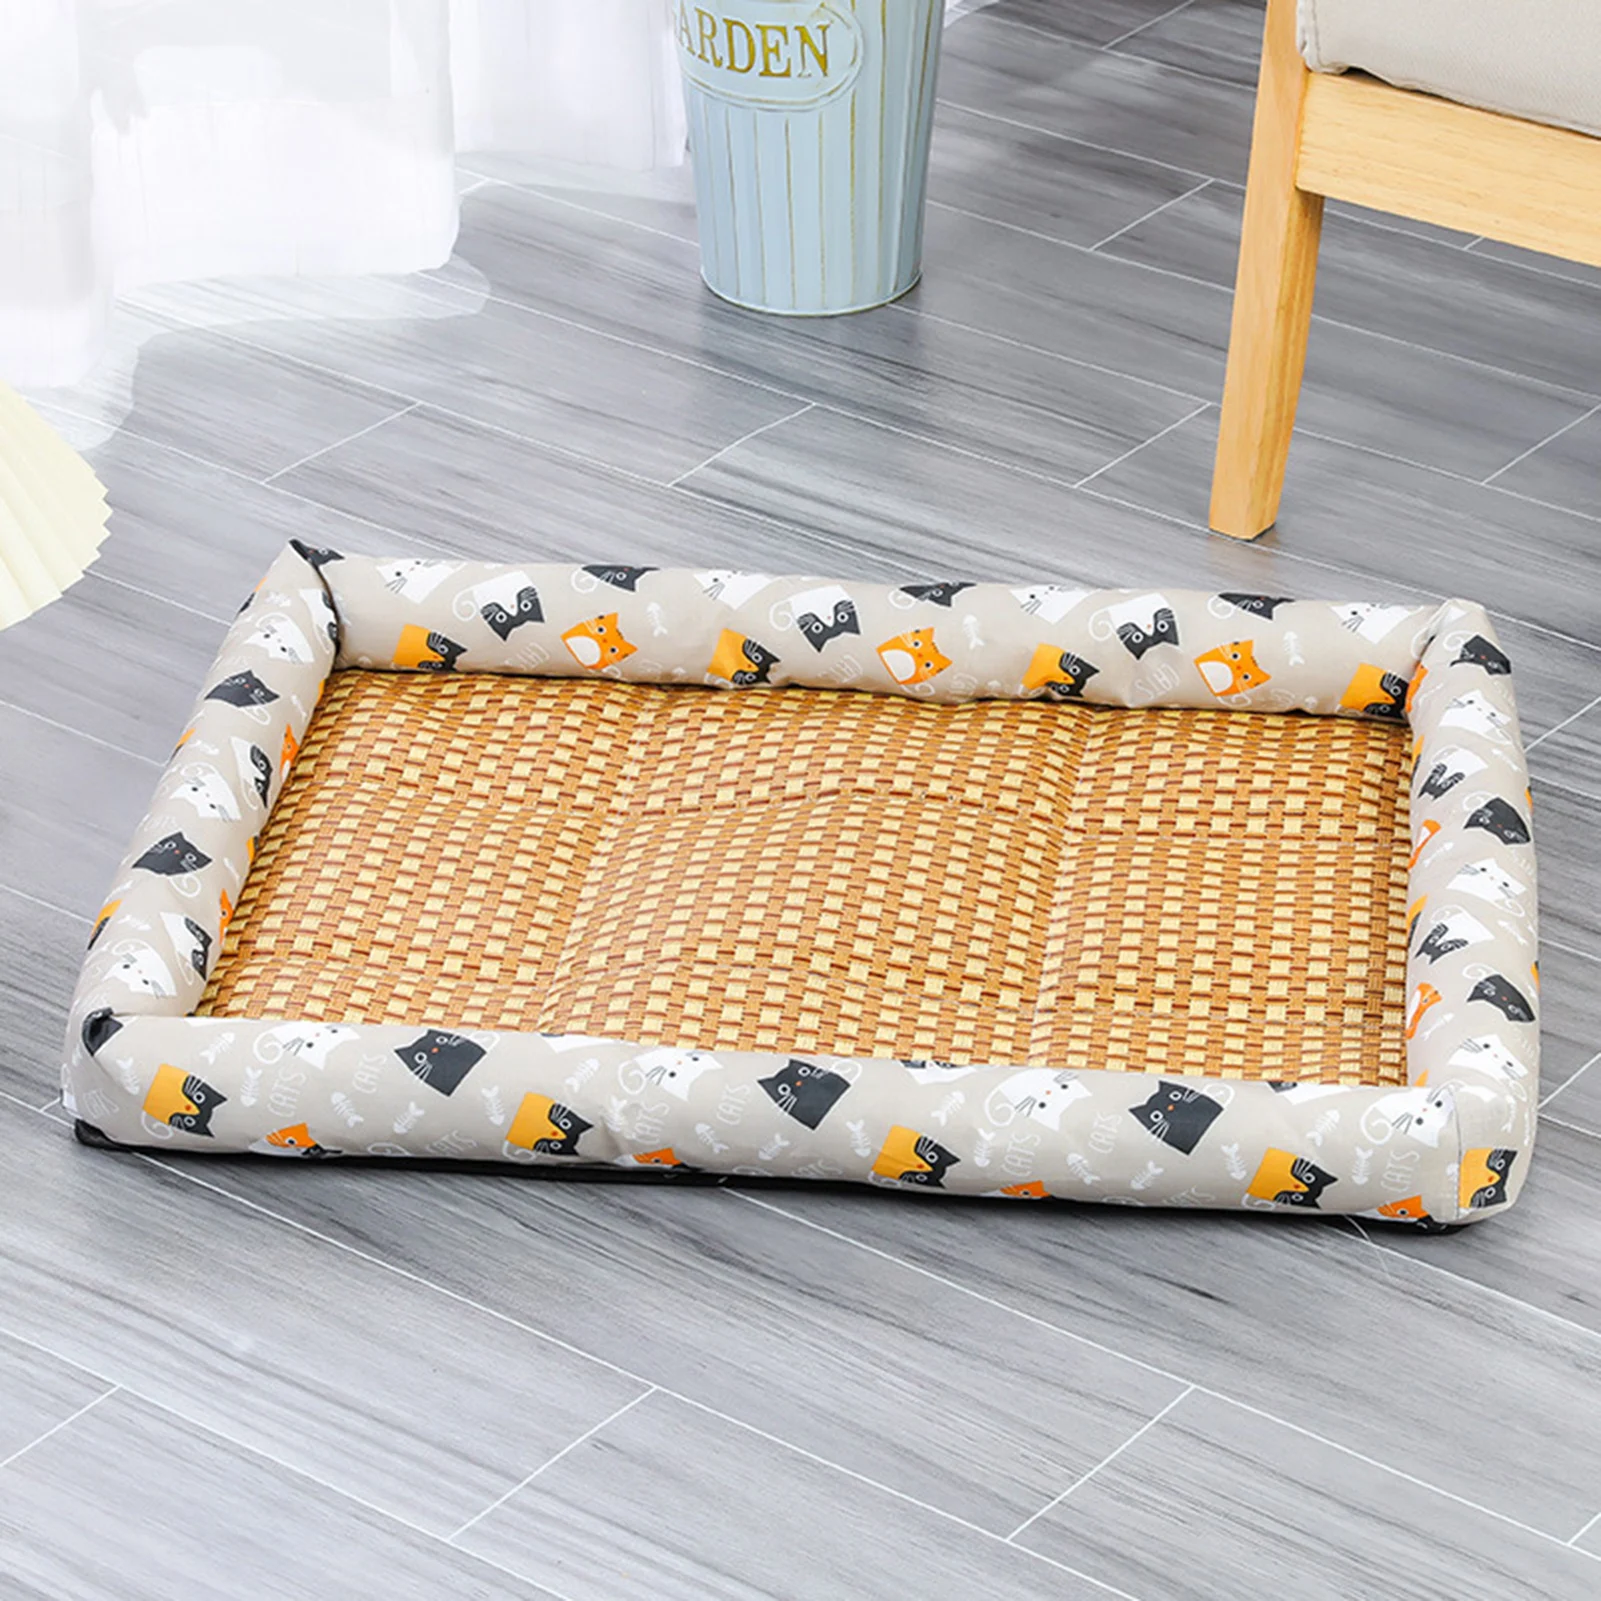 2019 summer sleeping mat for bed rattan foldable bamboo bed mat on sales queen 